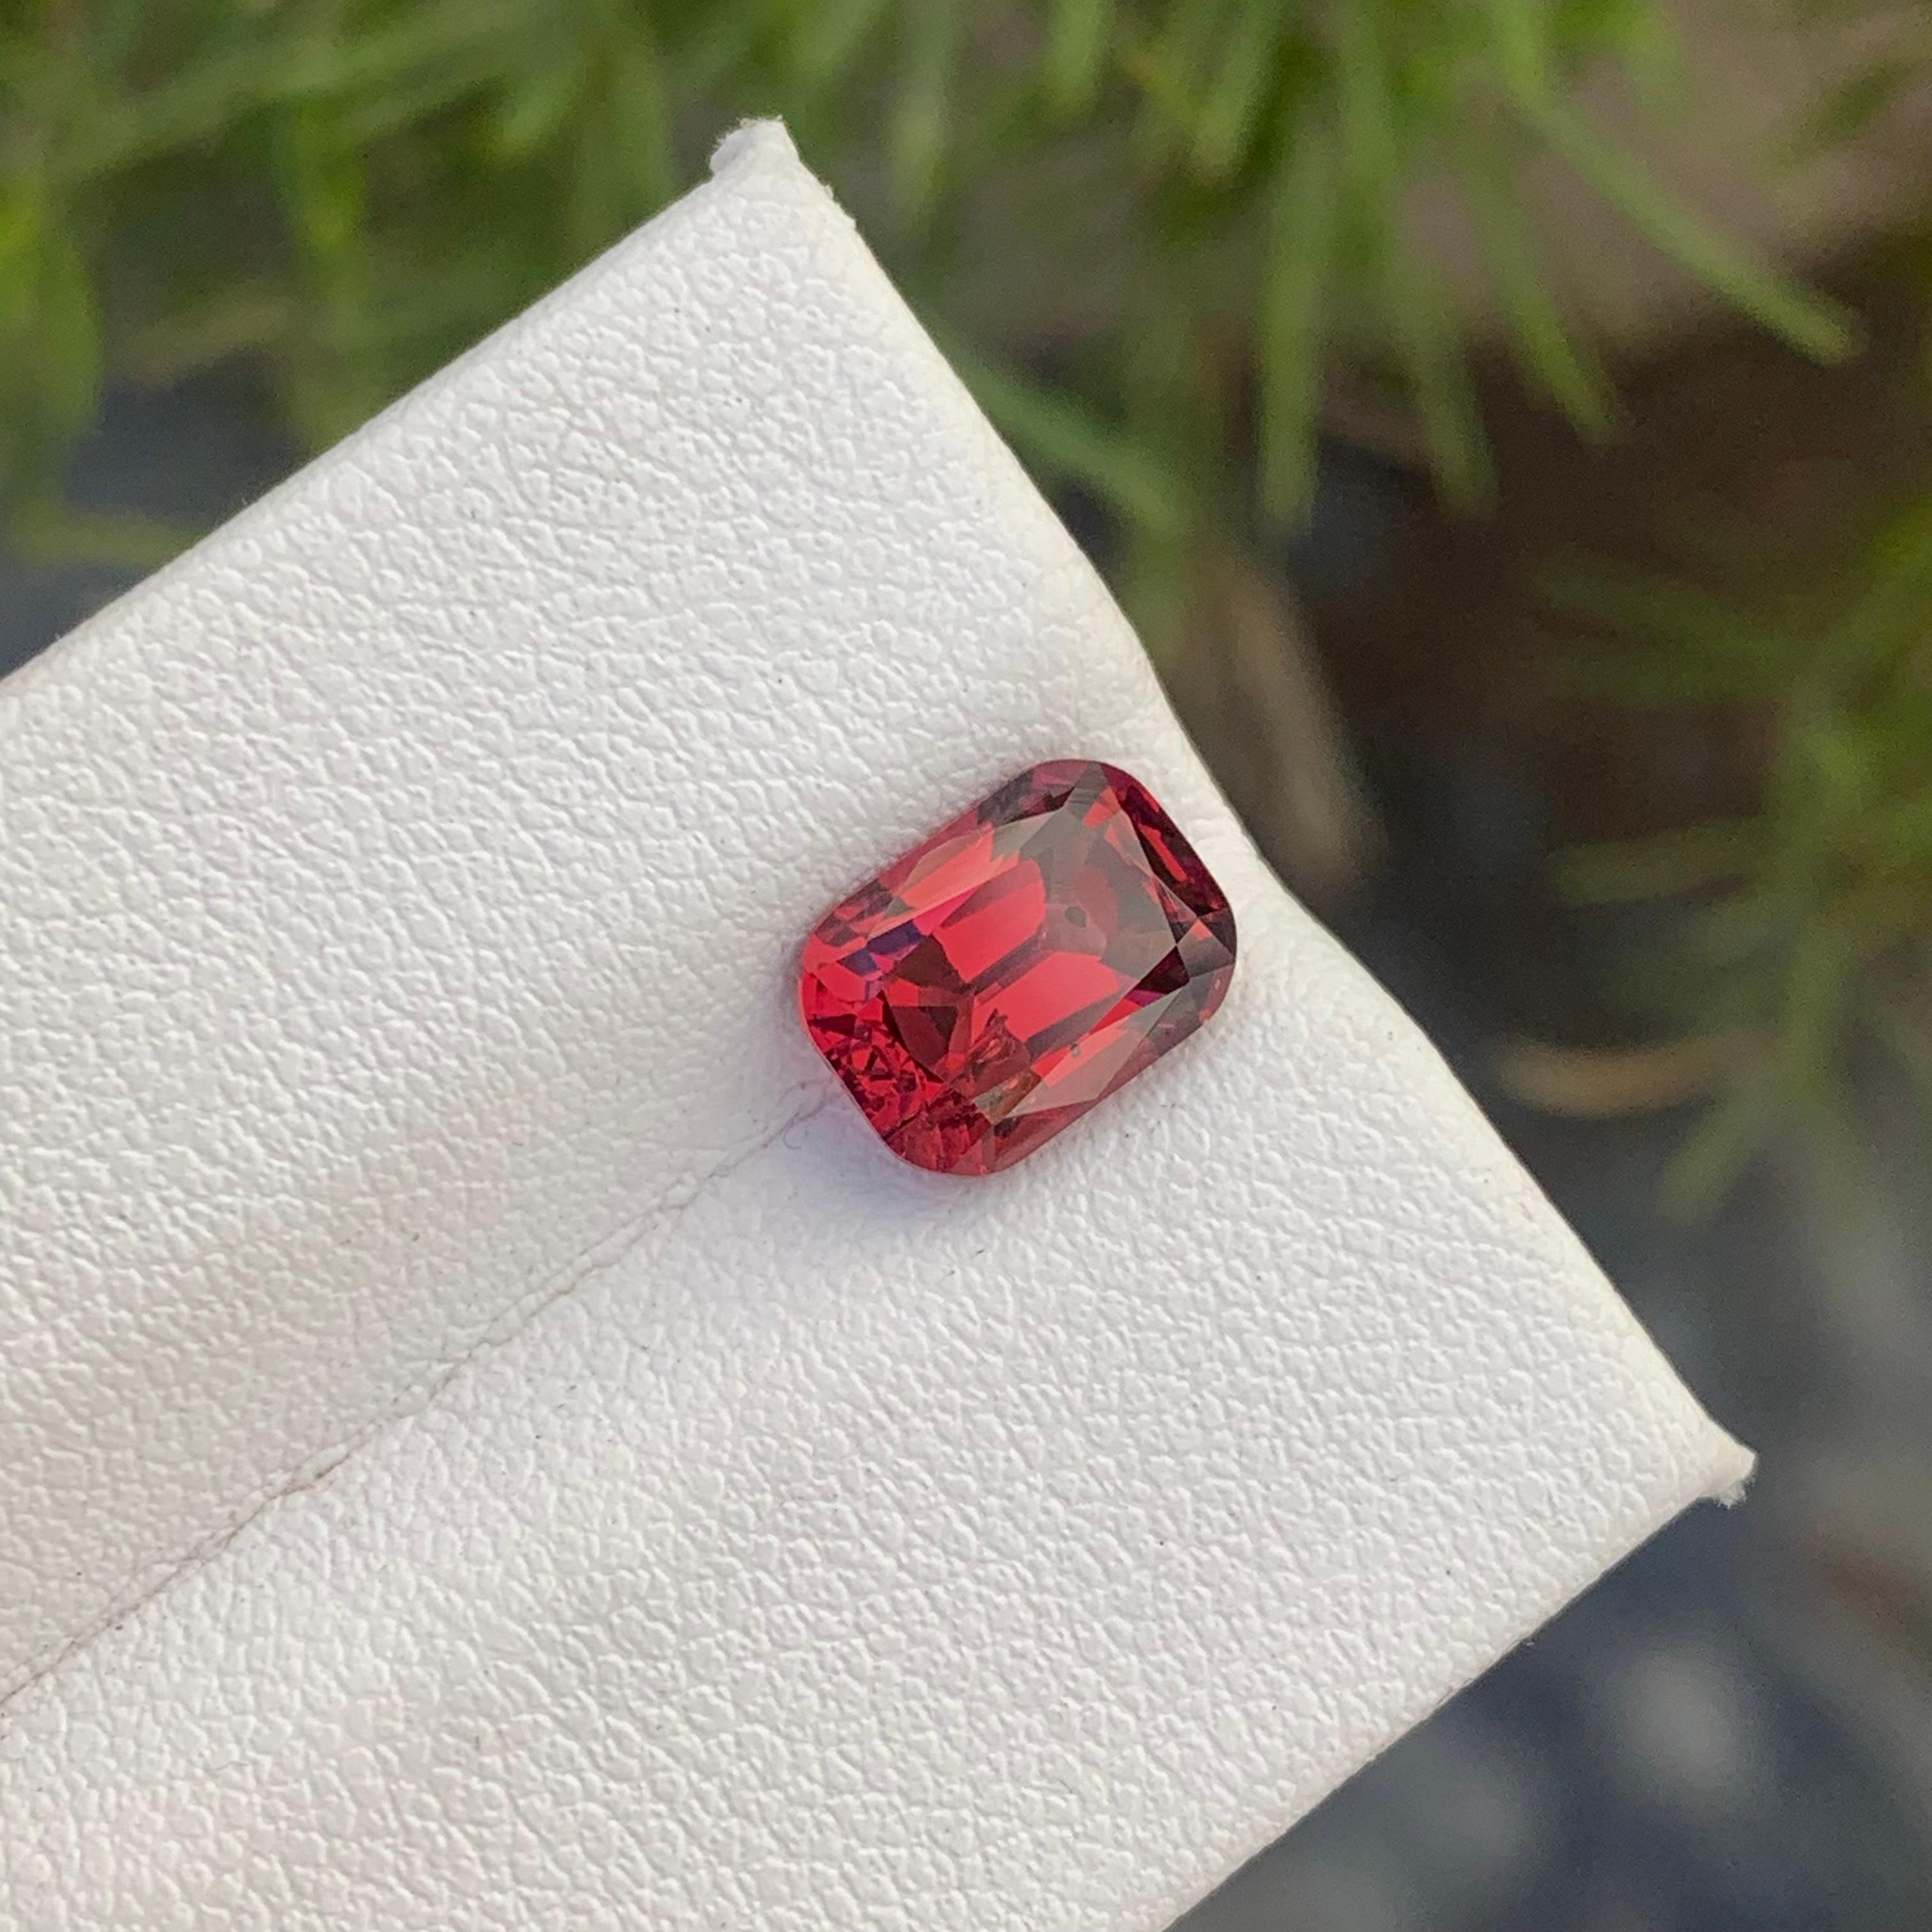 Women's or Men's Gorgeous Natural Loose Red Rhodolite Garnet Gemstone 2.45 Carat with SI Clarity For Sale